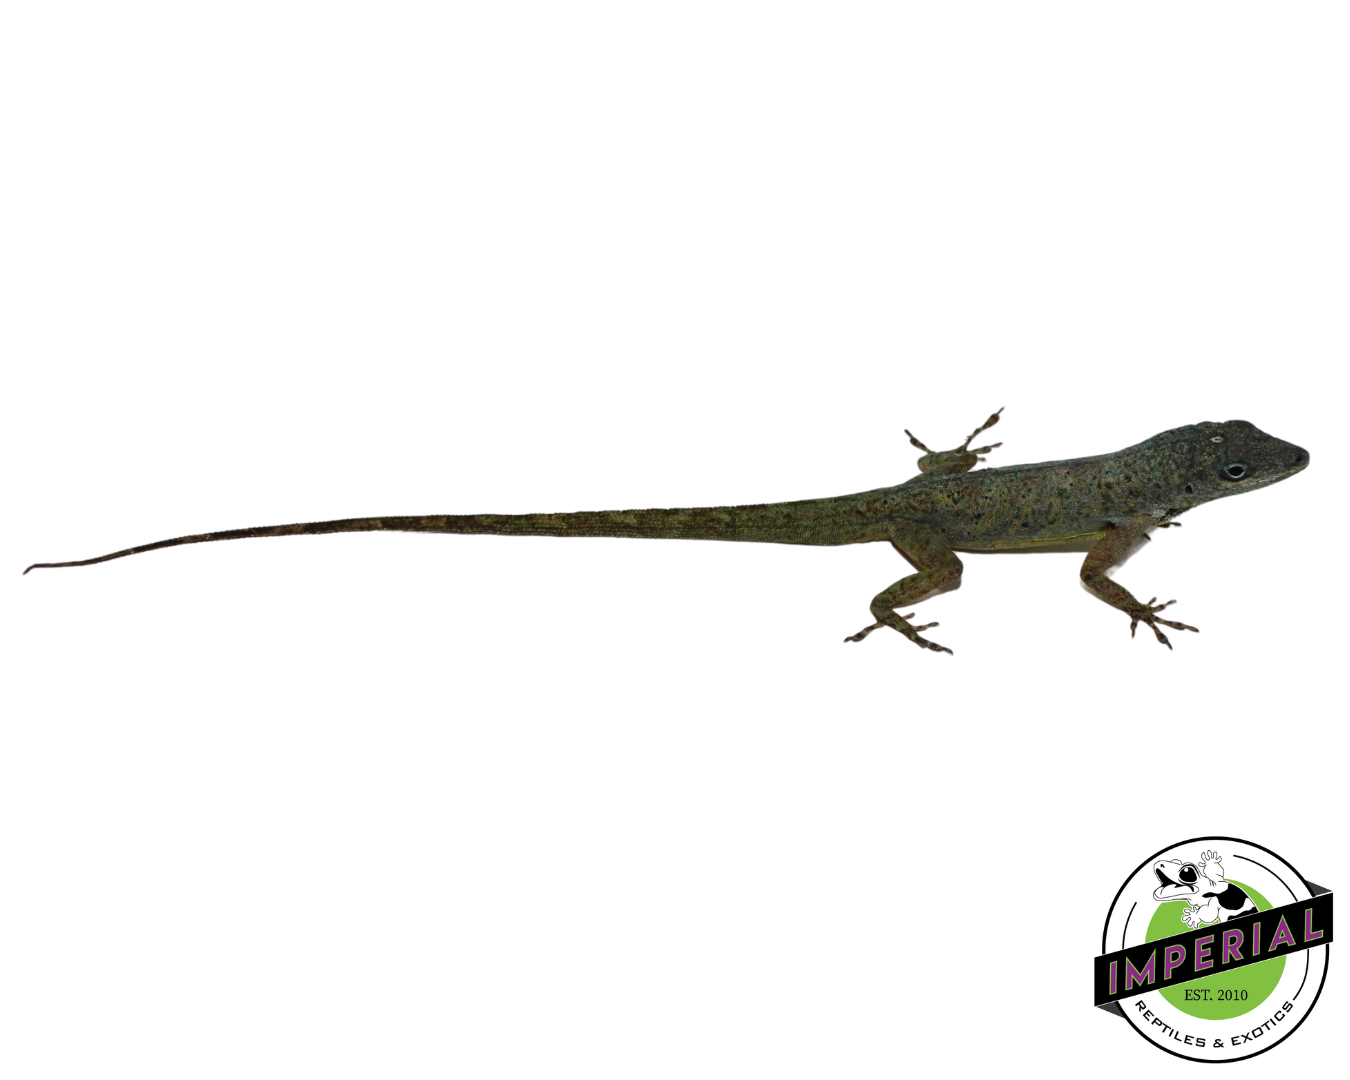 Guyana anole for sale, reptiles for sale, buy animals online